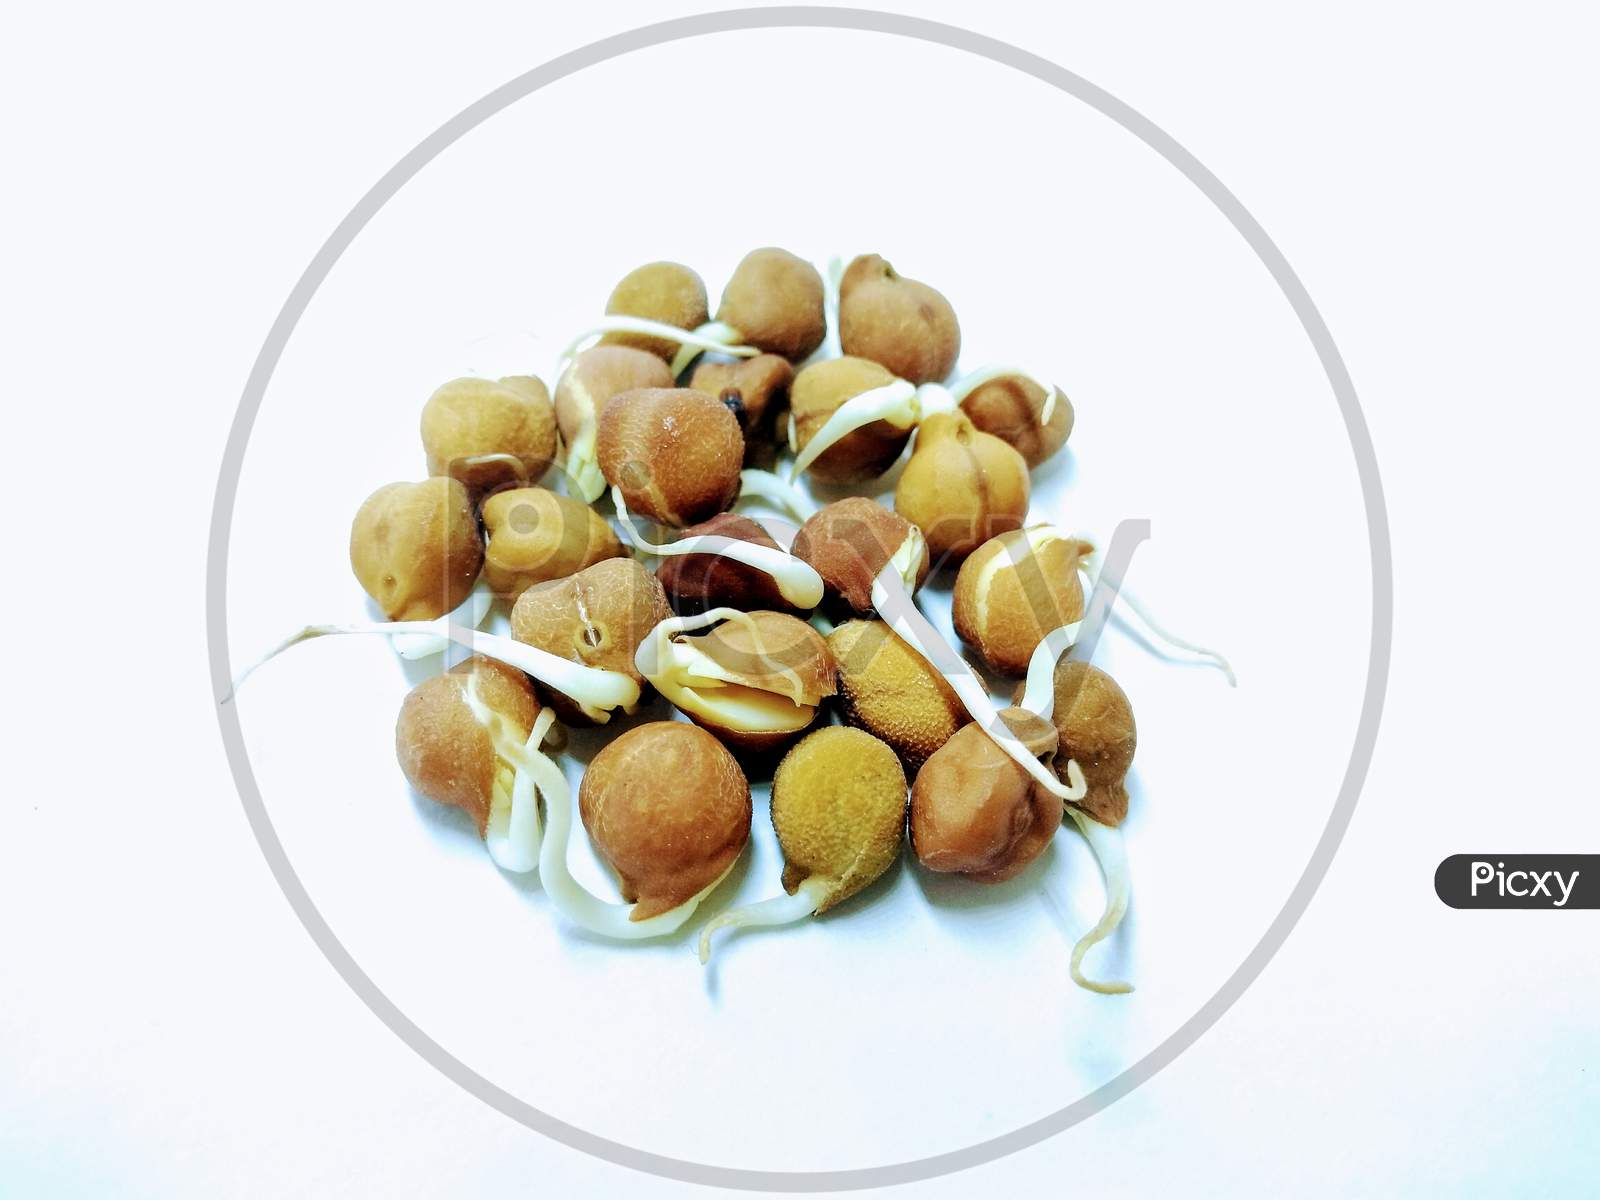 Sprouts Of Bengal Gram On White Background